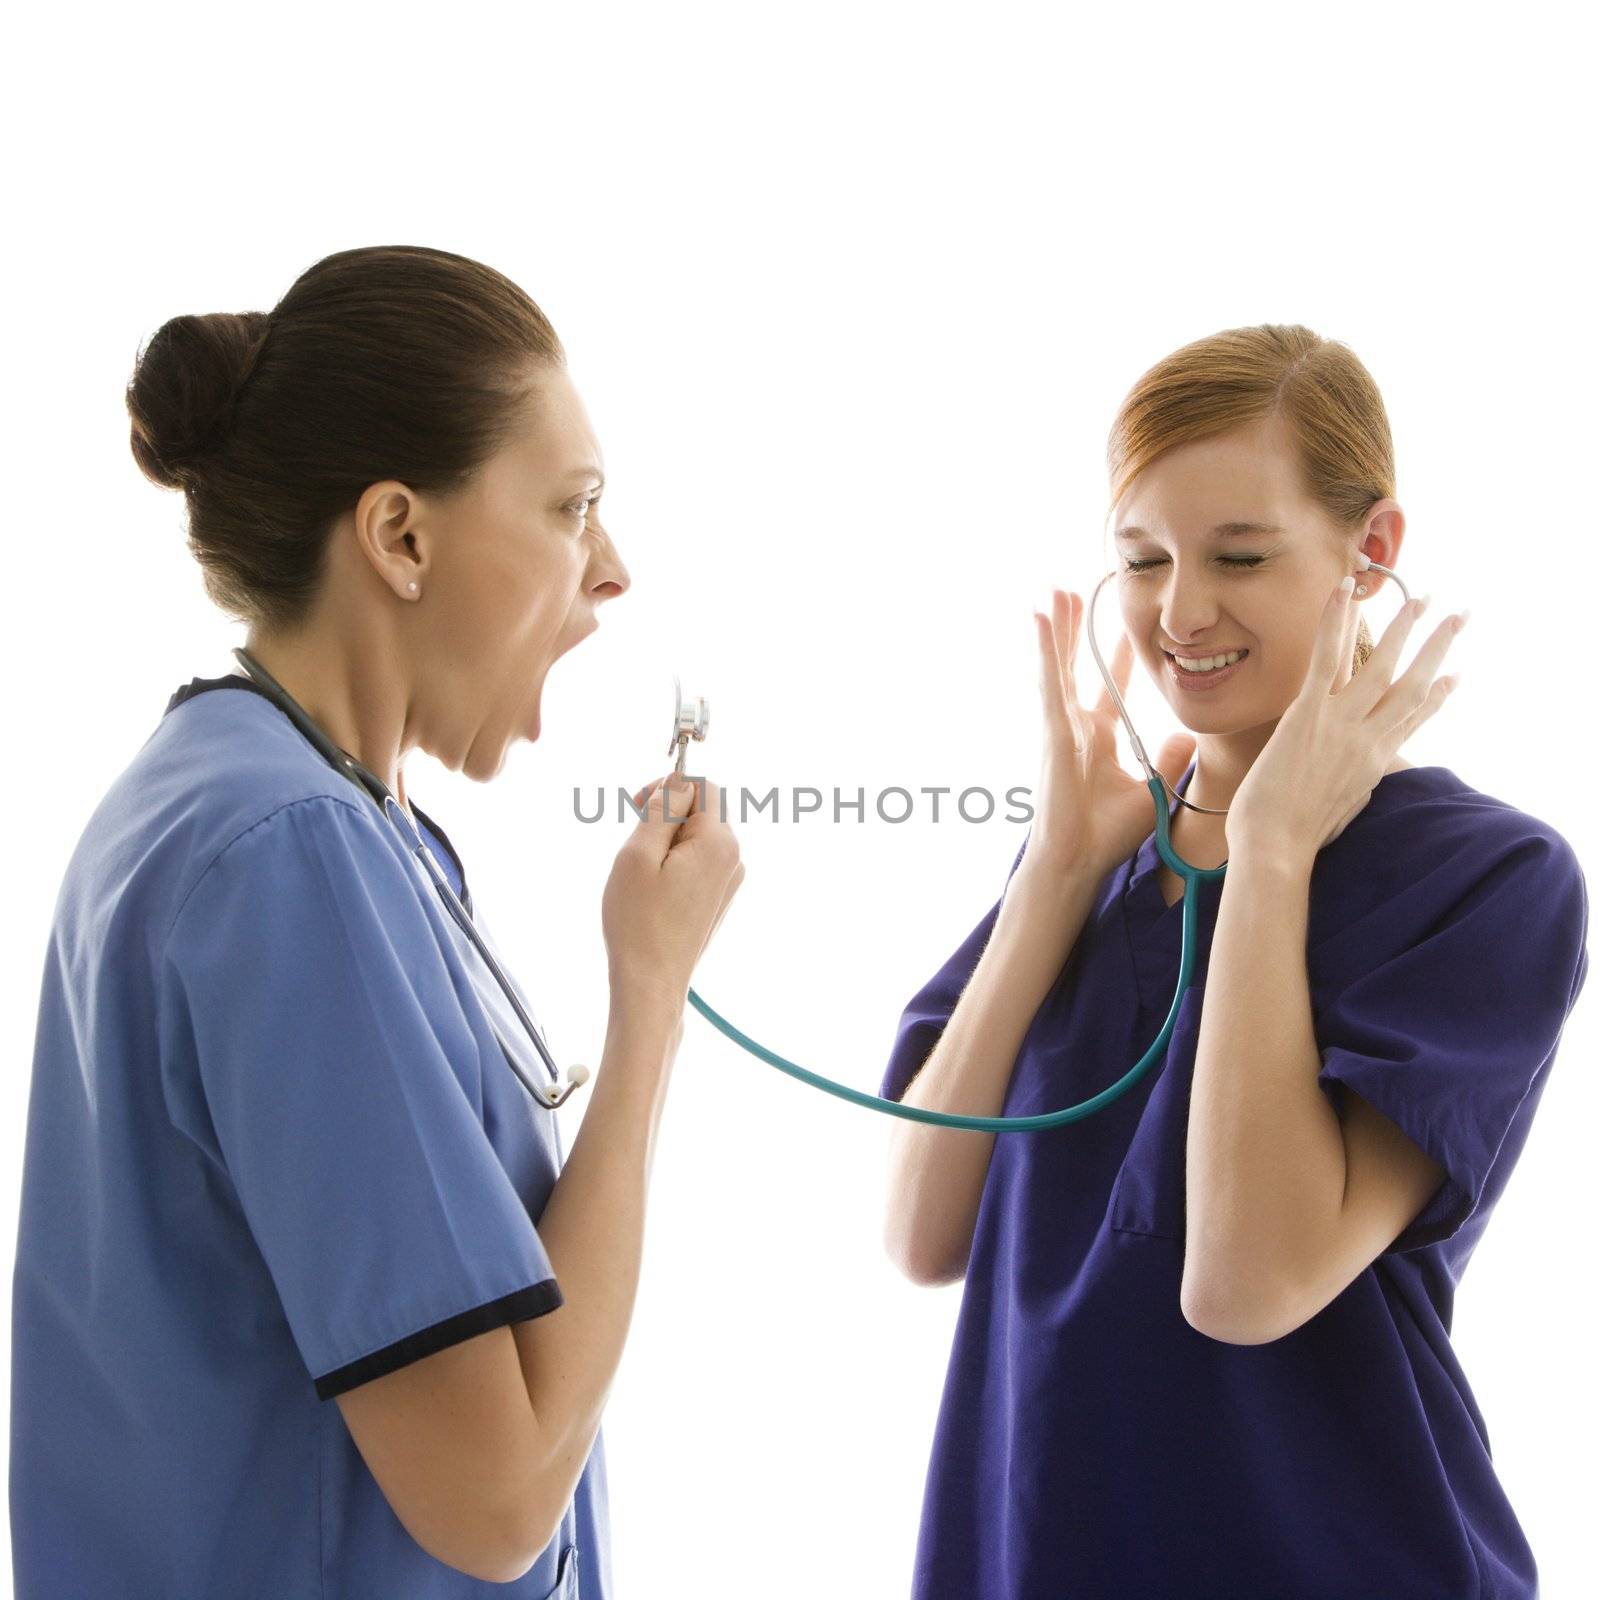 Portrait of Caucasian healthcare workers wearing scrubs with one yelling into stethoscope that is attached to other's ears against white background.